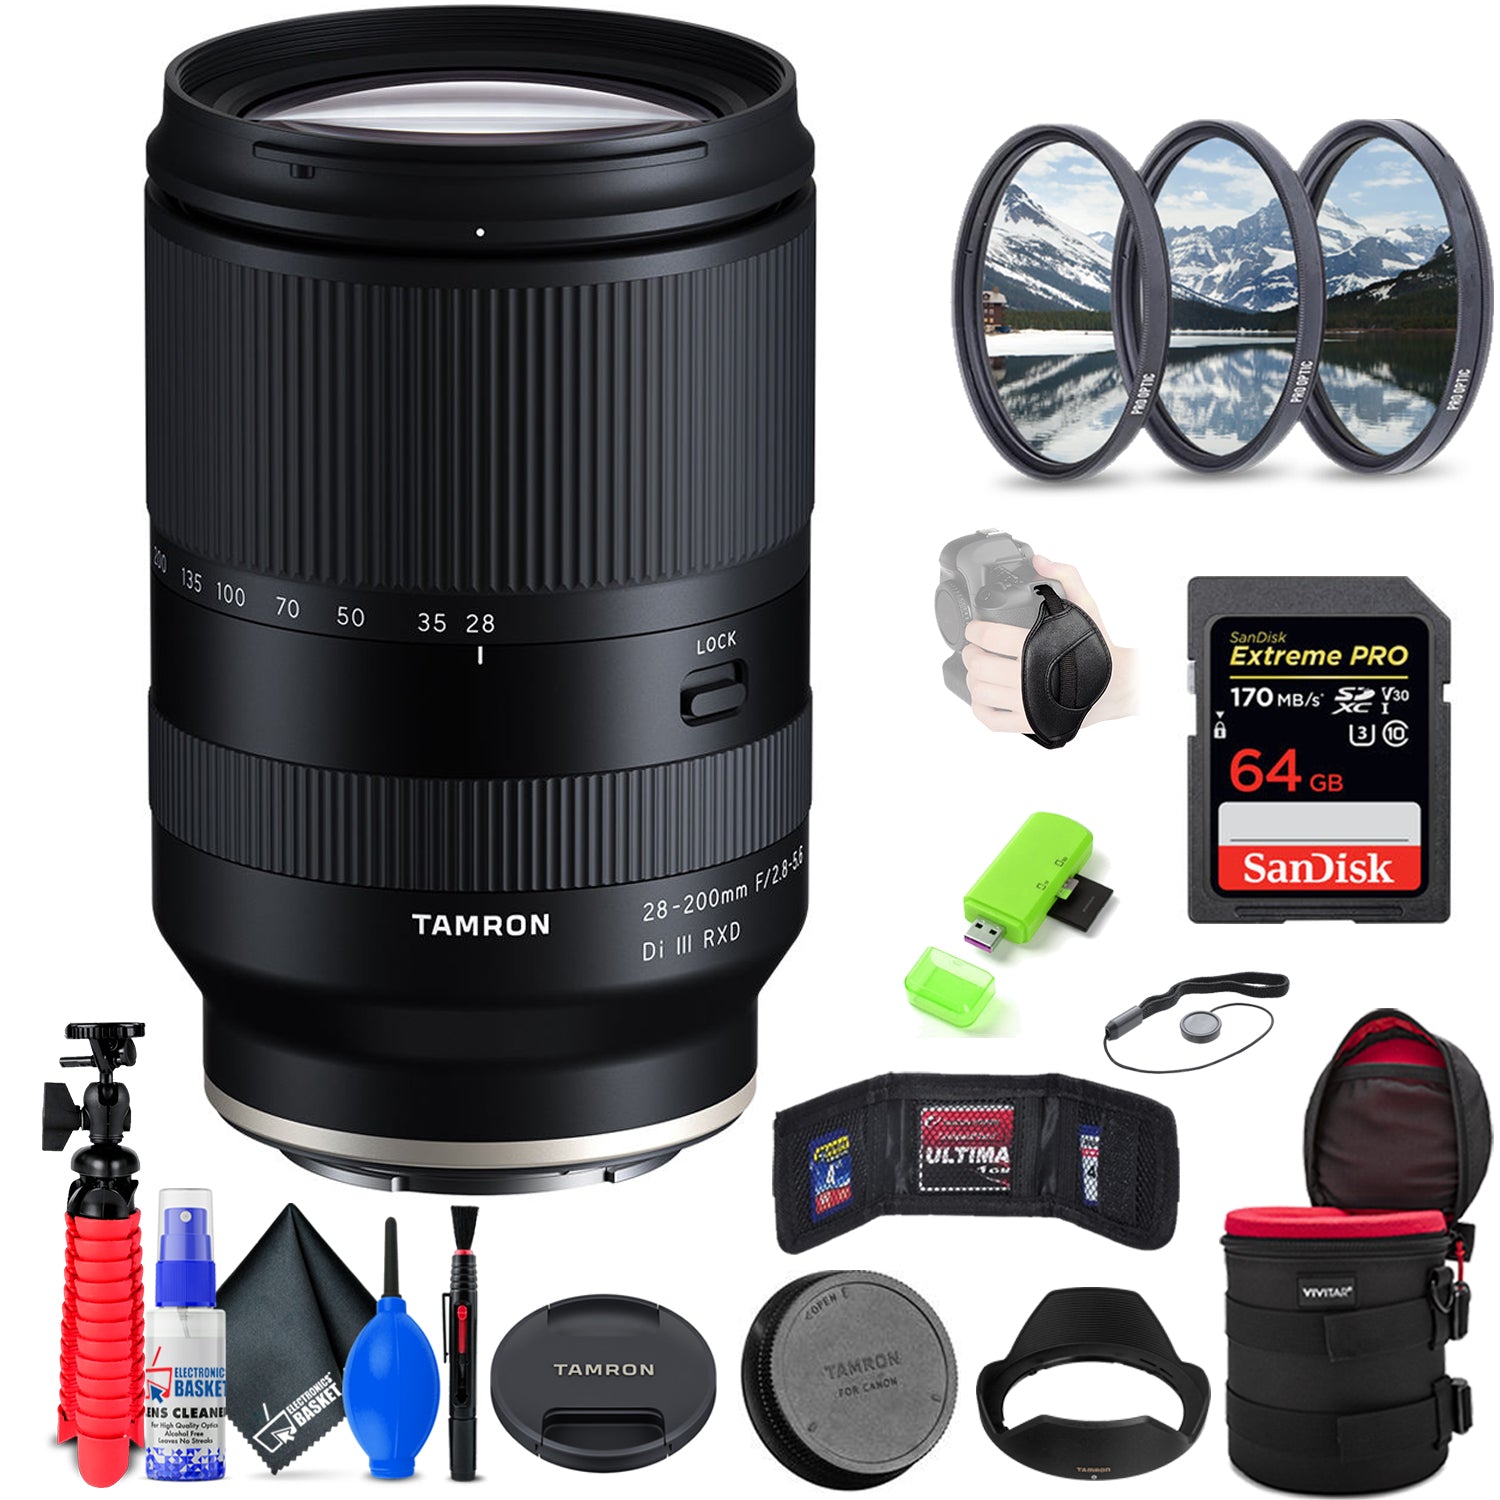 Tamron 28-200mm f/2.8-5.6 Di III RXD Lens for Sony E + Accessories (INTL Model)